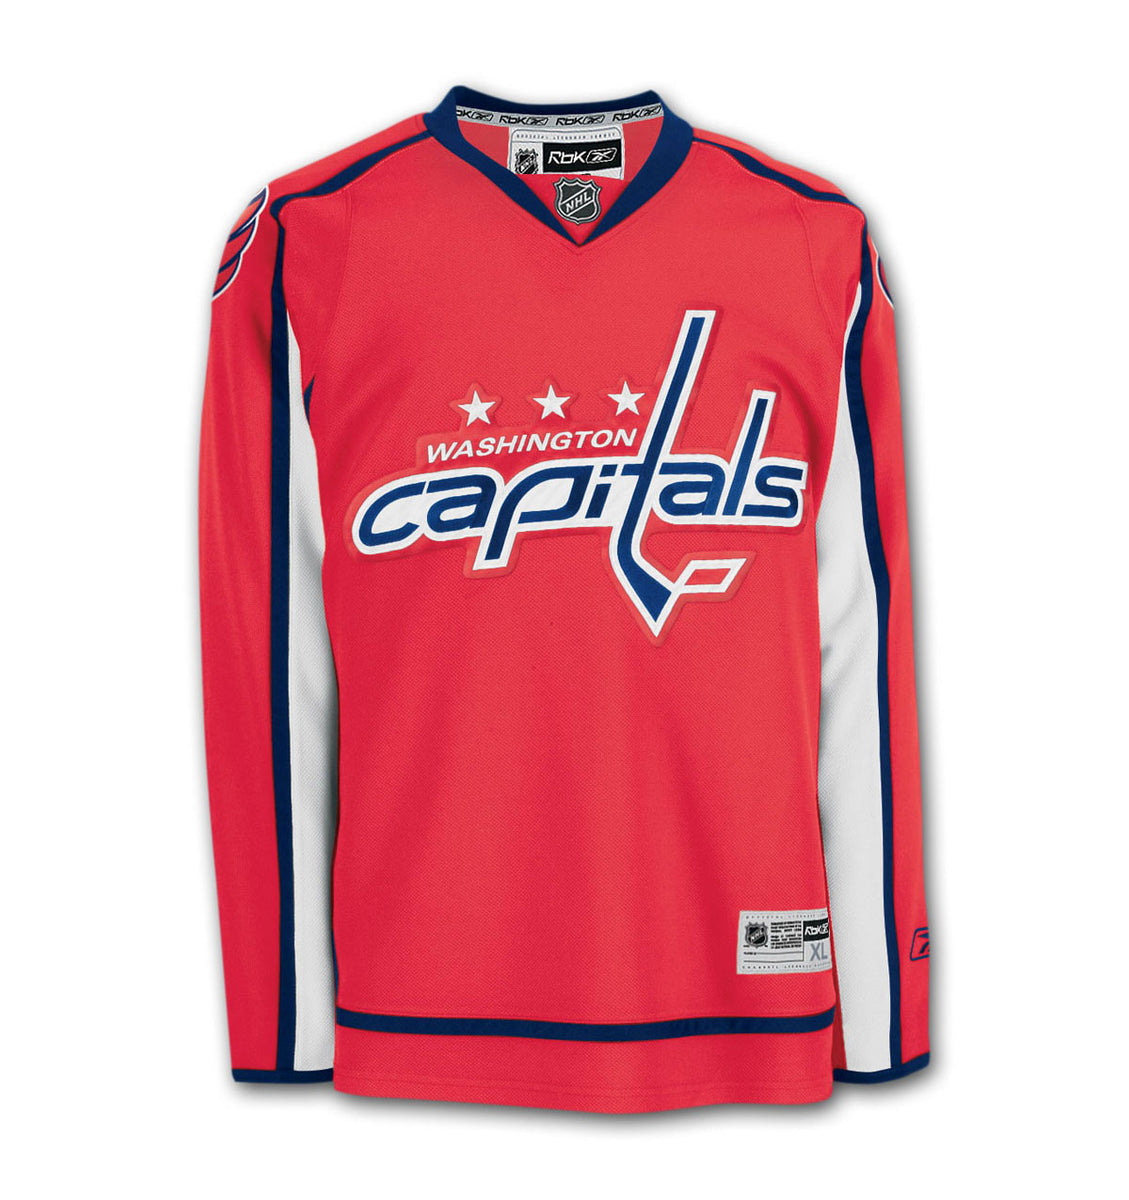 The Caps Reverse Retro, which on the captain's jerseys, feature